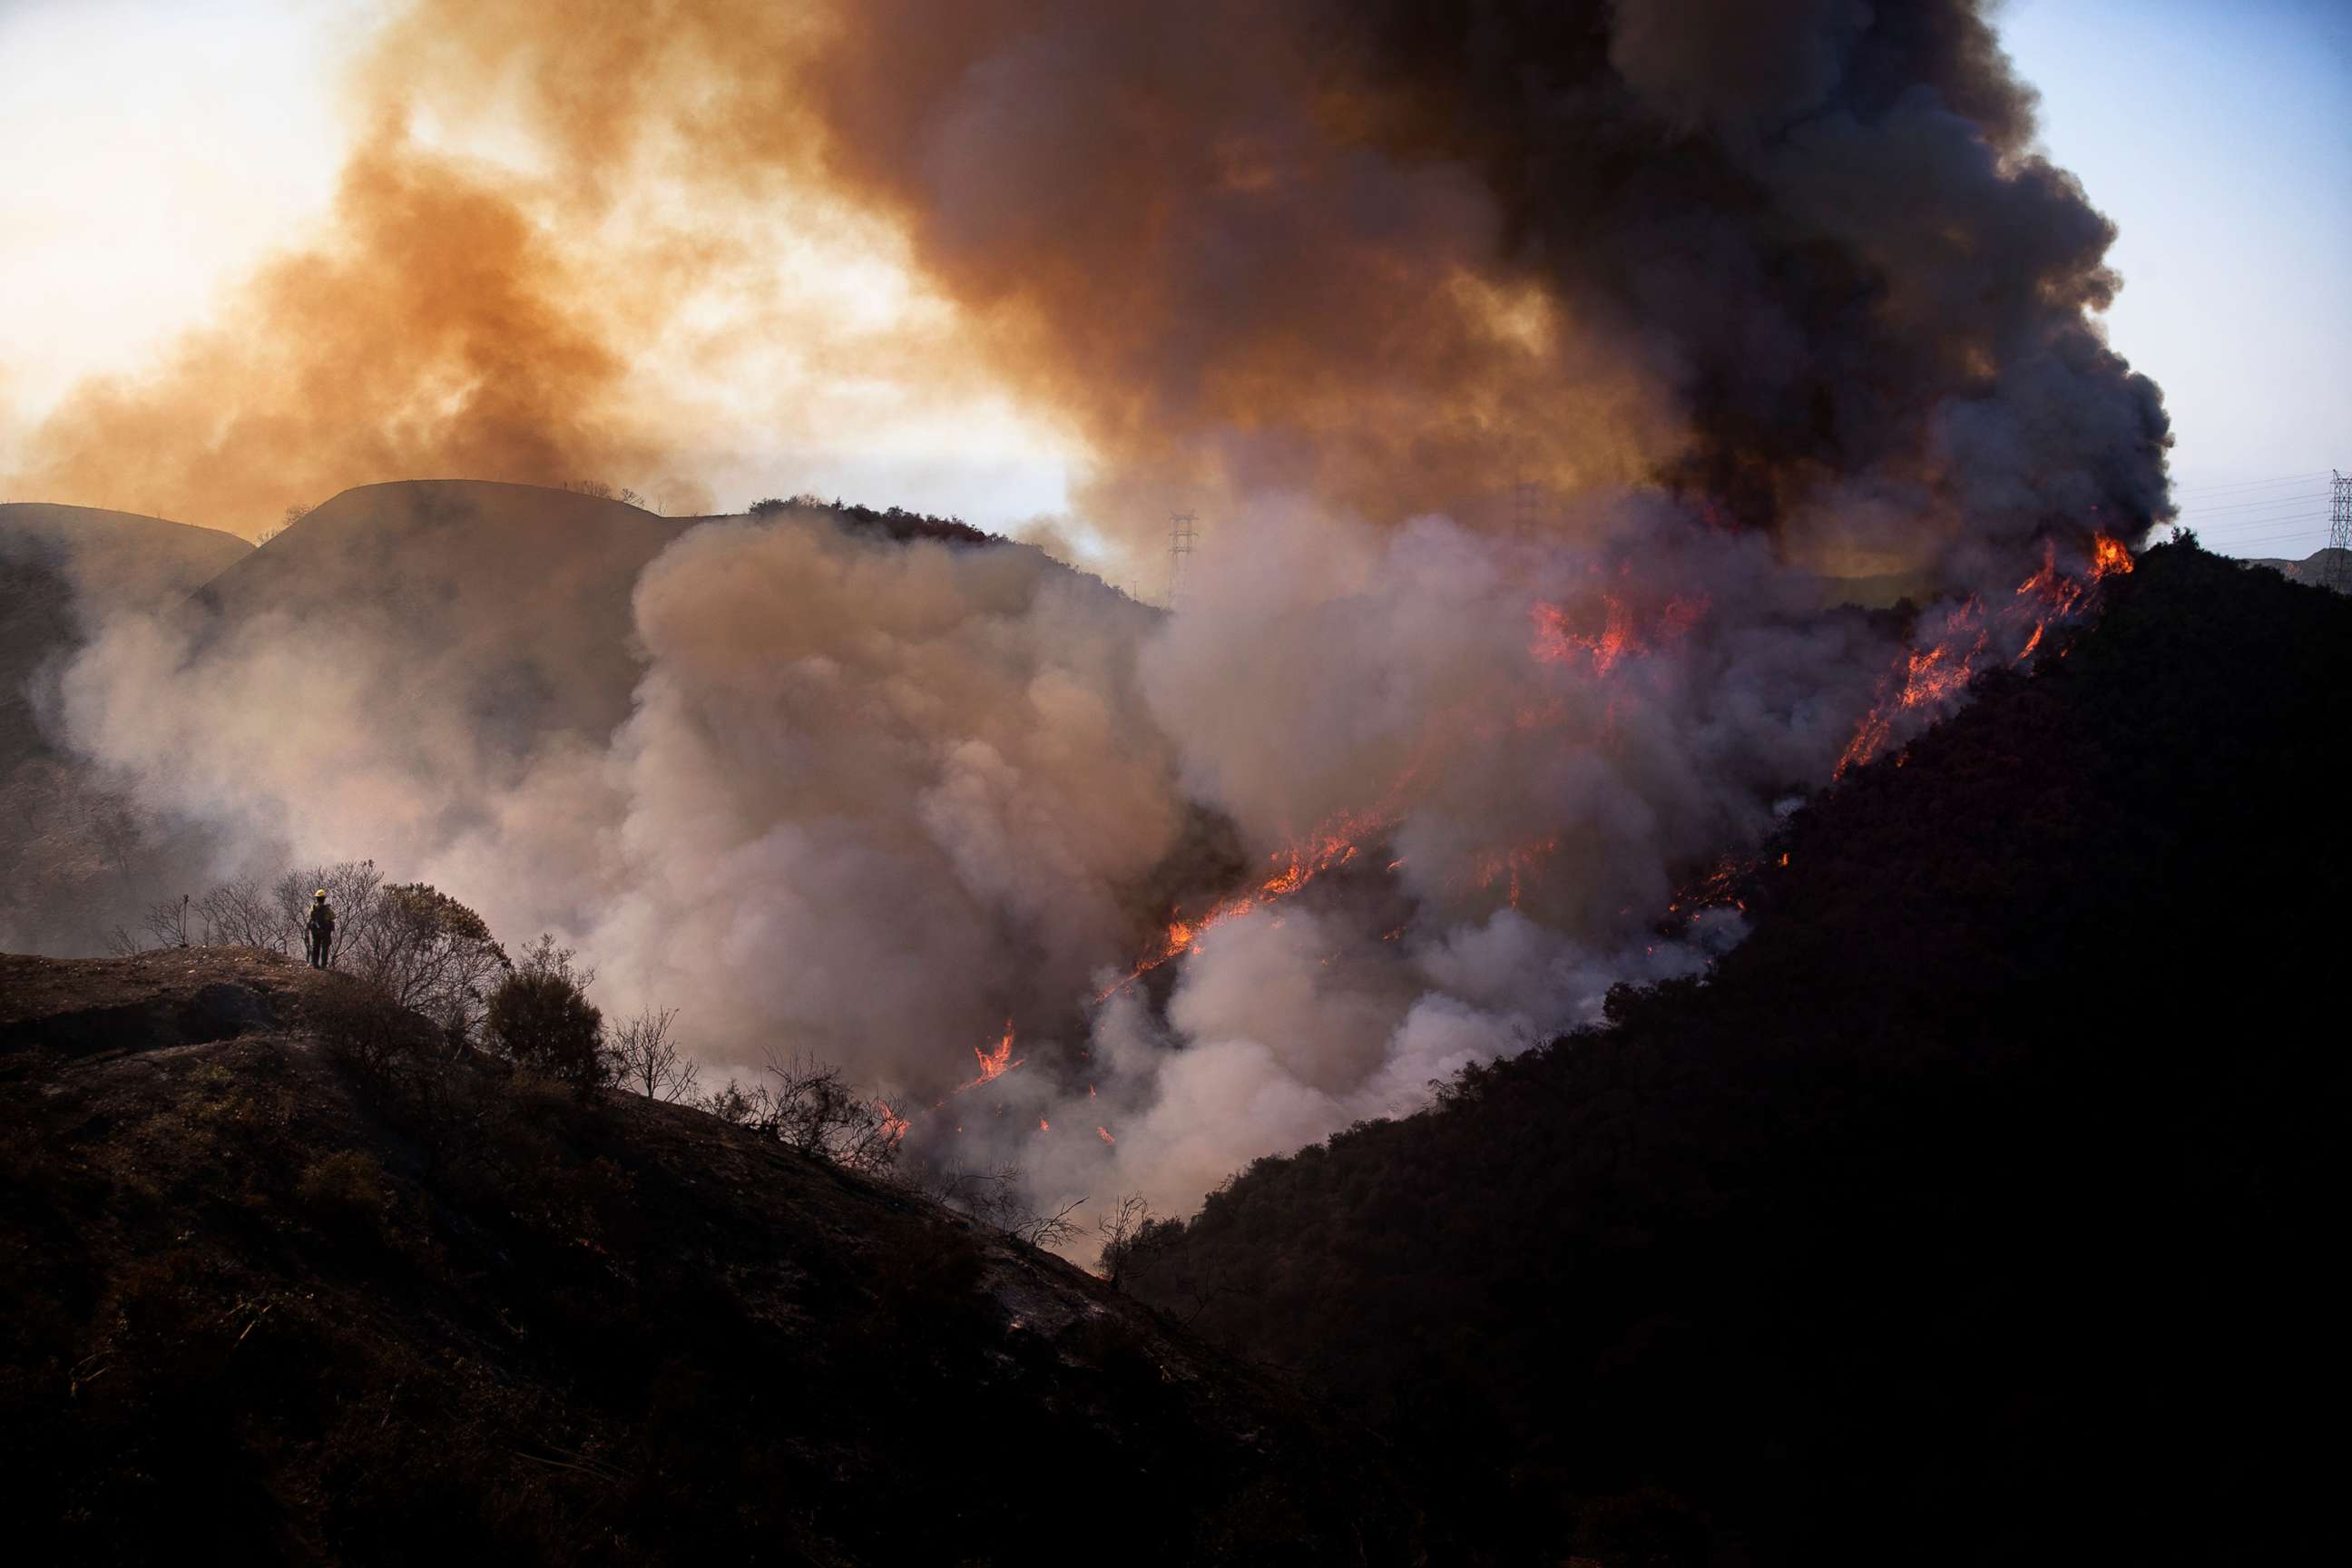 PHOTO: A view of the Getty Fire spreading in the hills behind the Getty Center in Los Angeles, Oct. 28, 2019.